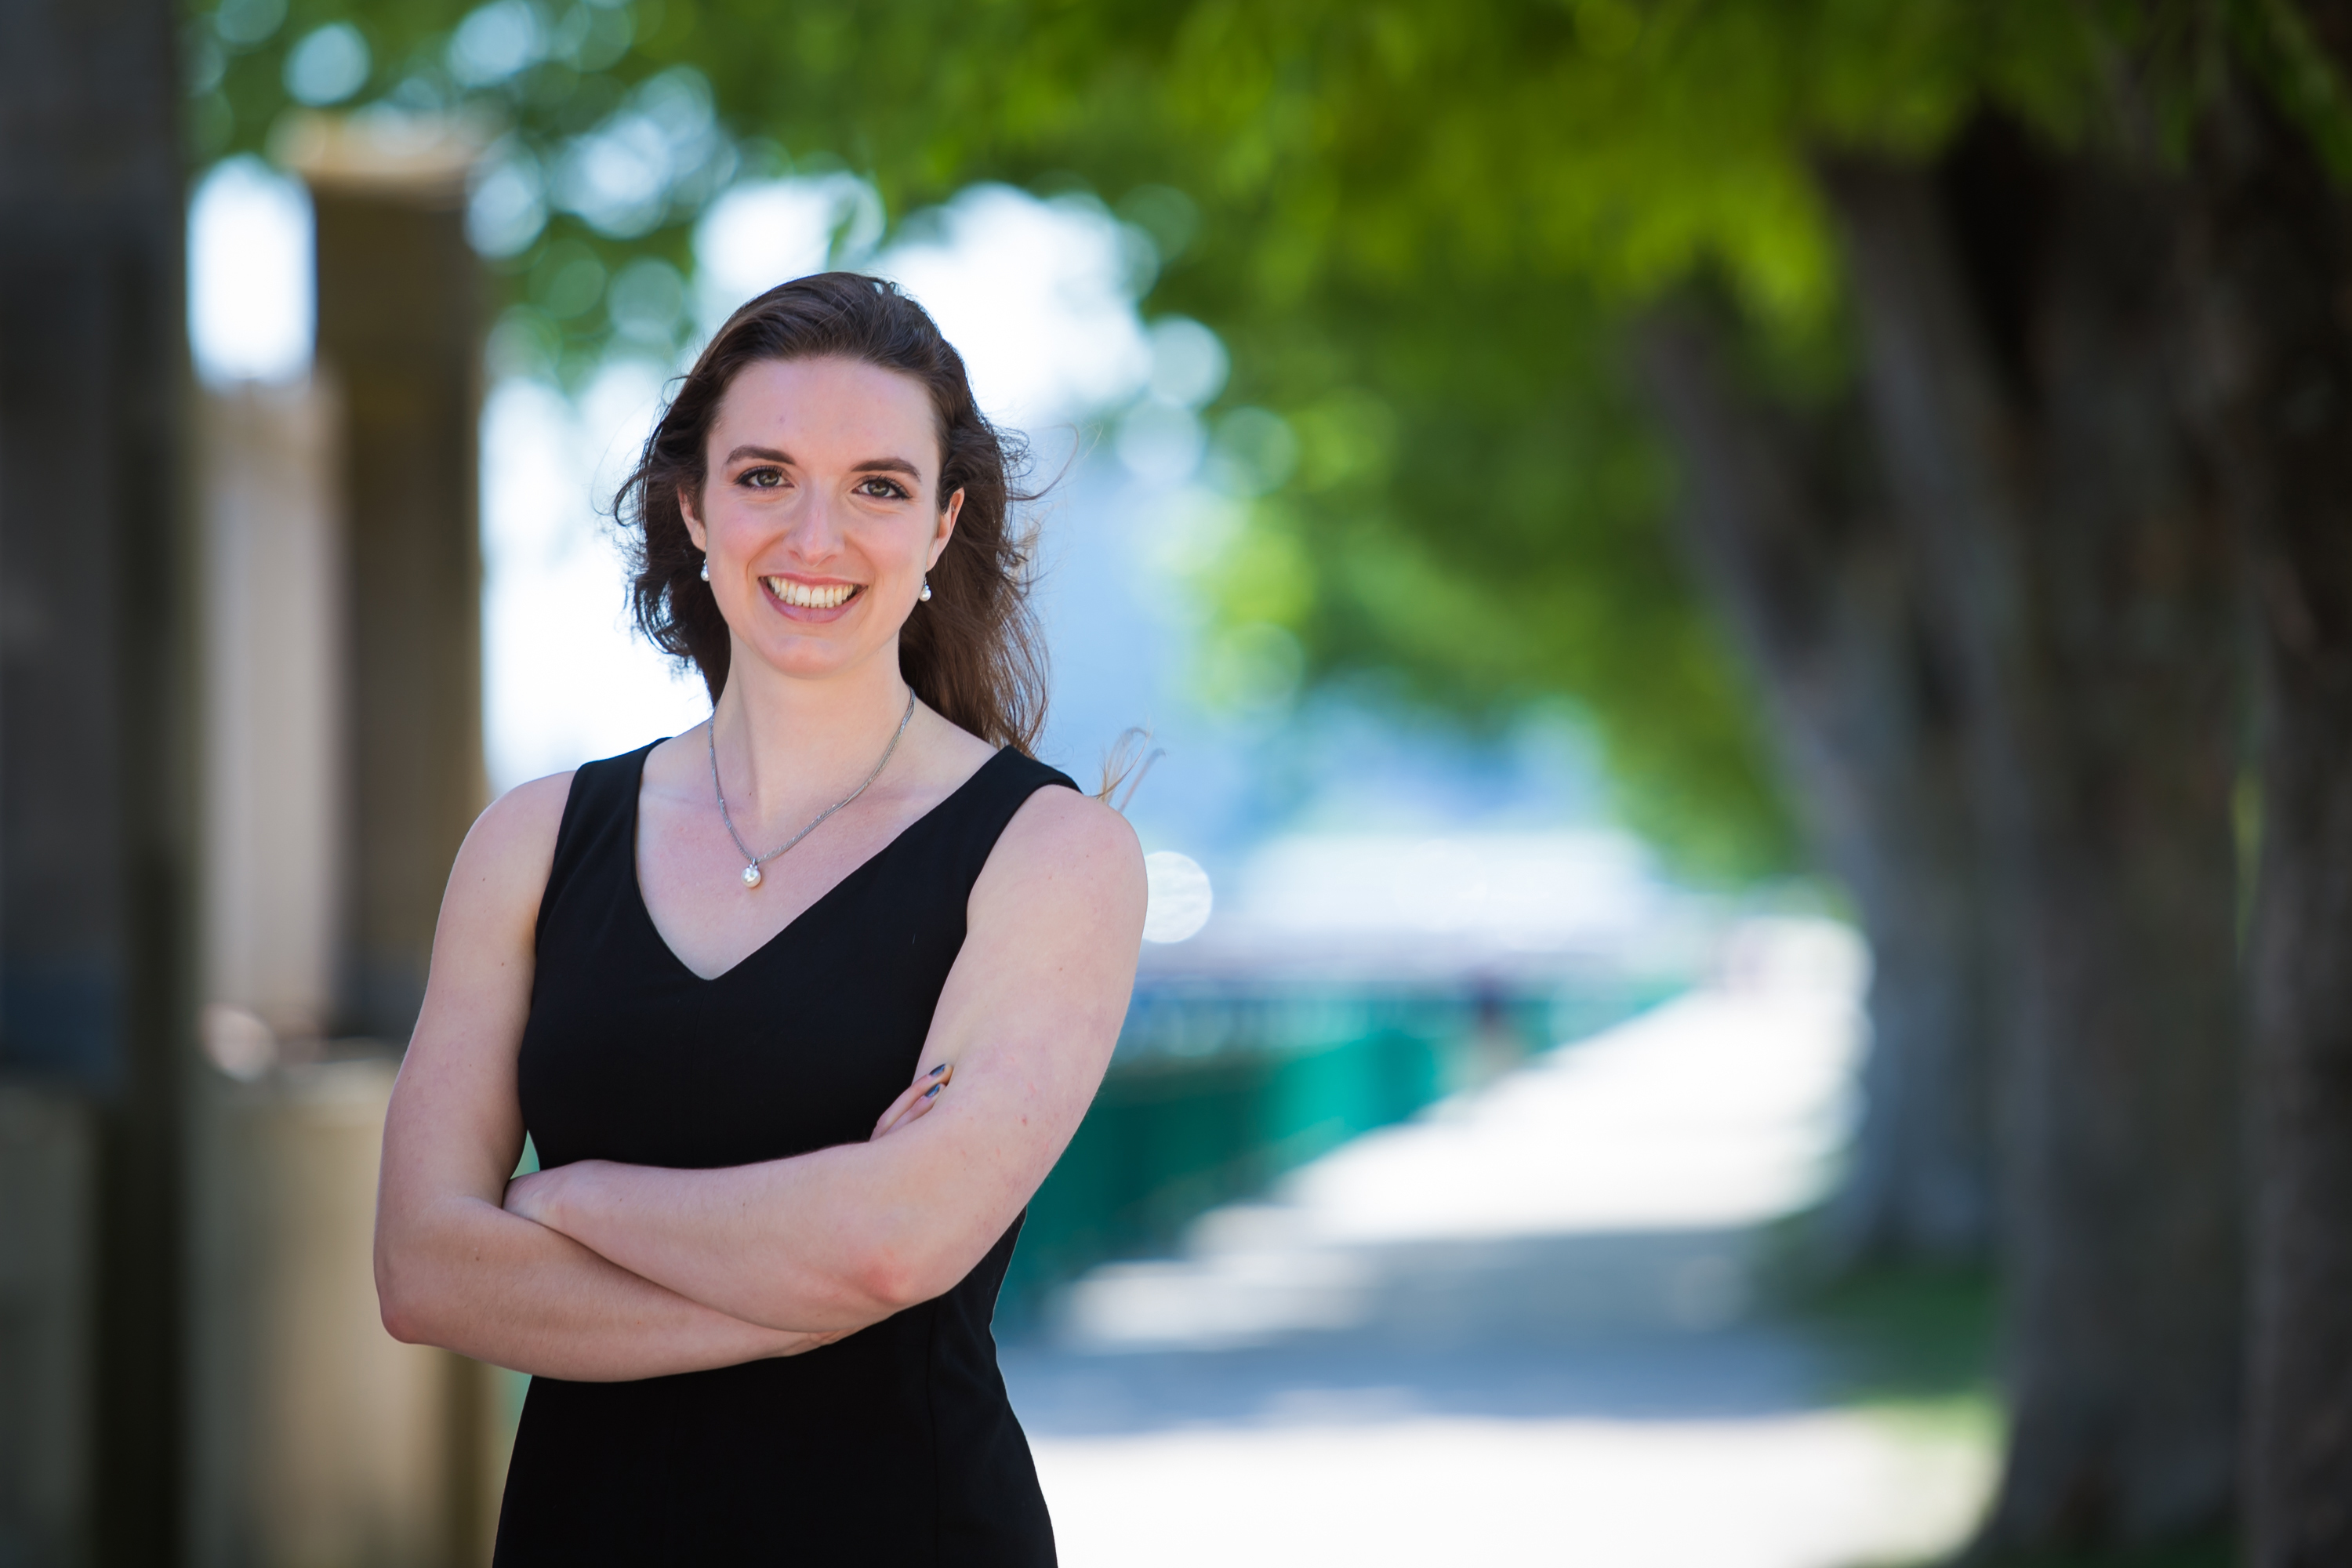 PhD student Erin Walk is studying the intersection between data science, policy, and technology in the Social and Engineering Systems program (SES).